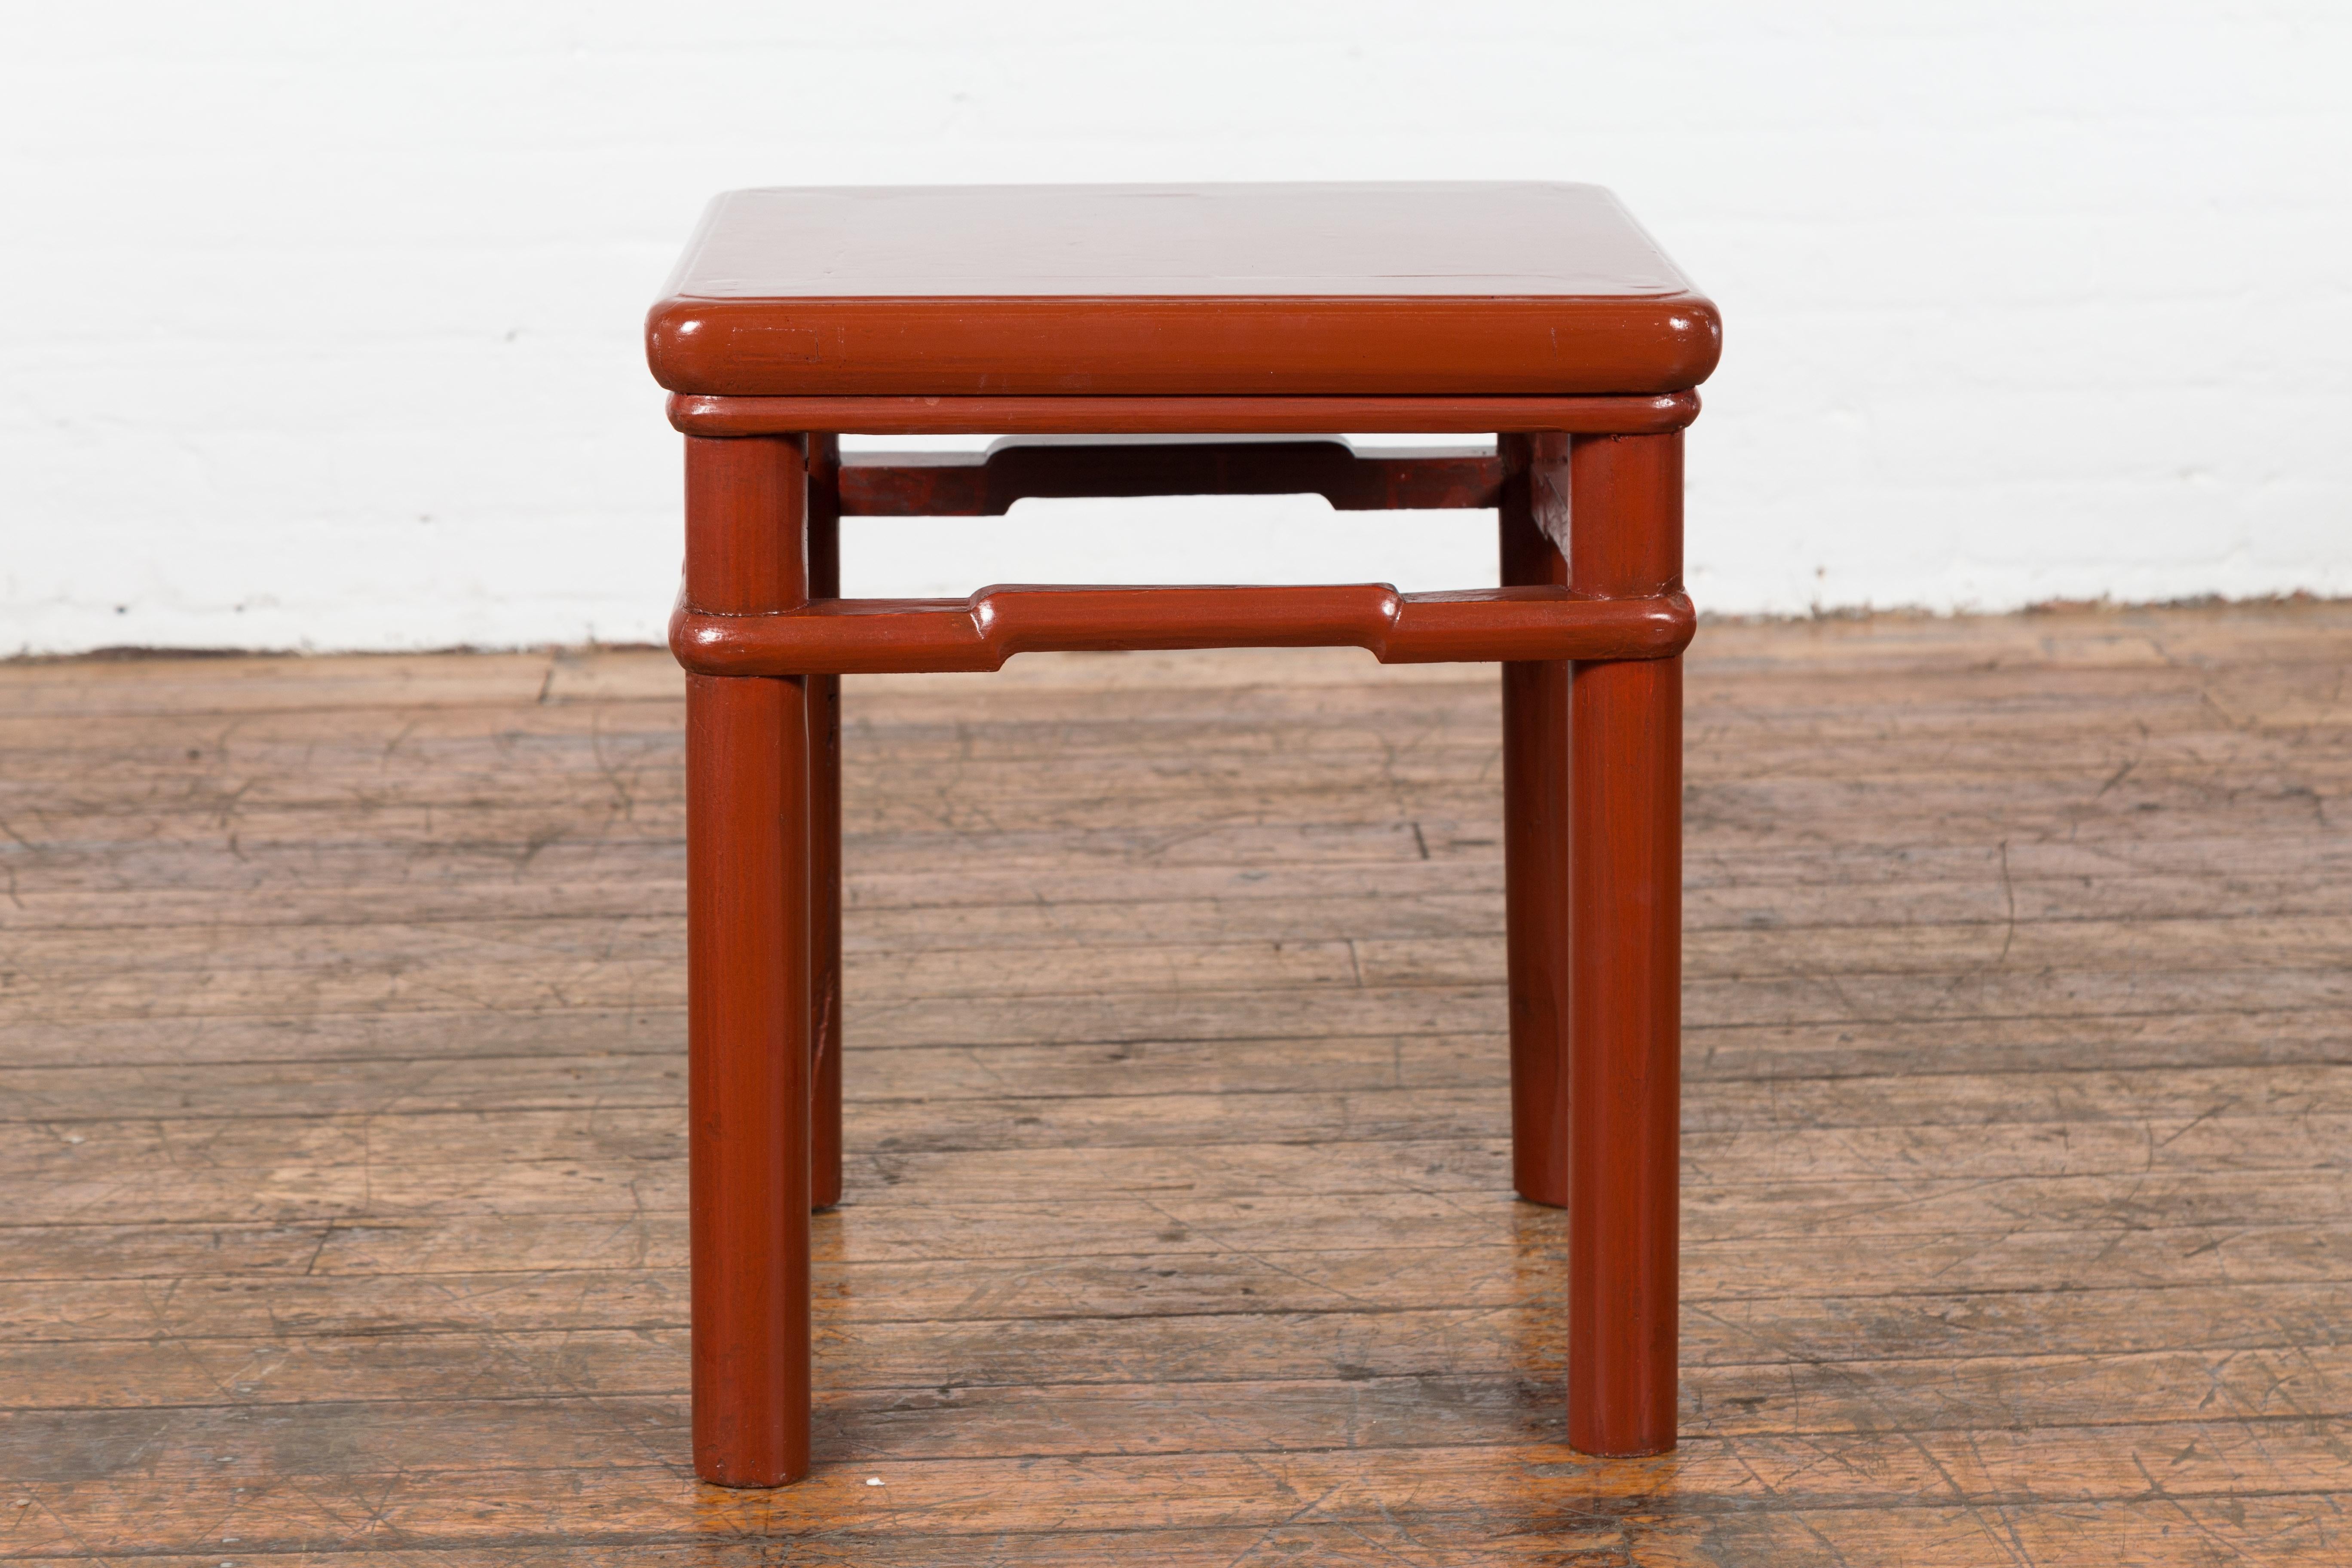 Chinese 1900s Qing Dynasty Red Lacquer Stool or Table with Humpback Stretchers For Sale 10